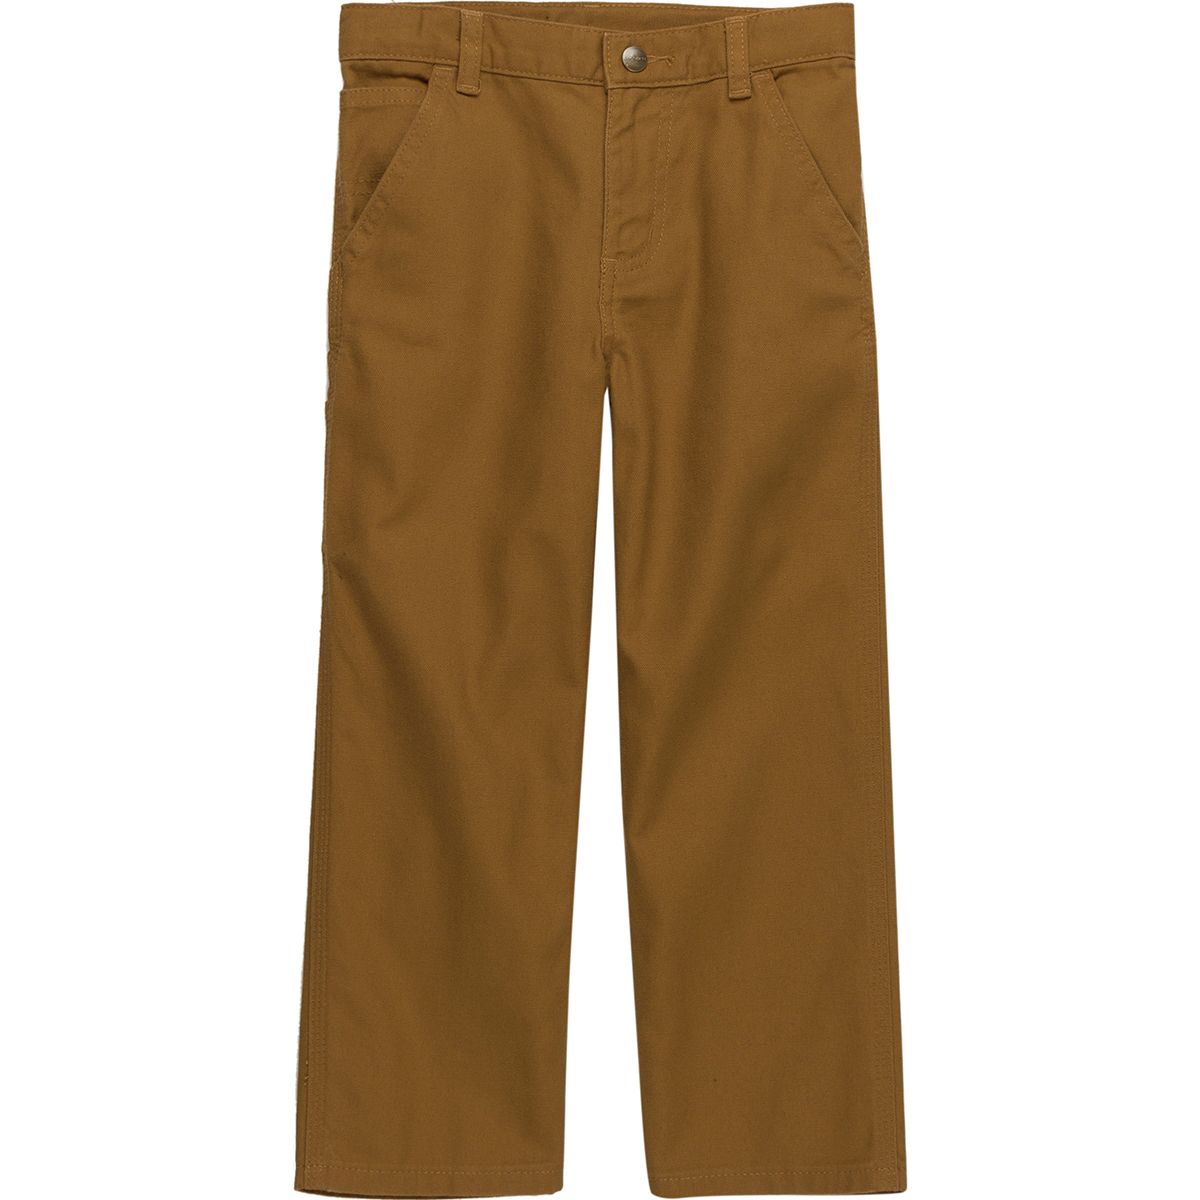 Carhartt Washed Duck Dungaree Pant - Toddler Boys'